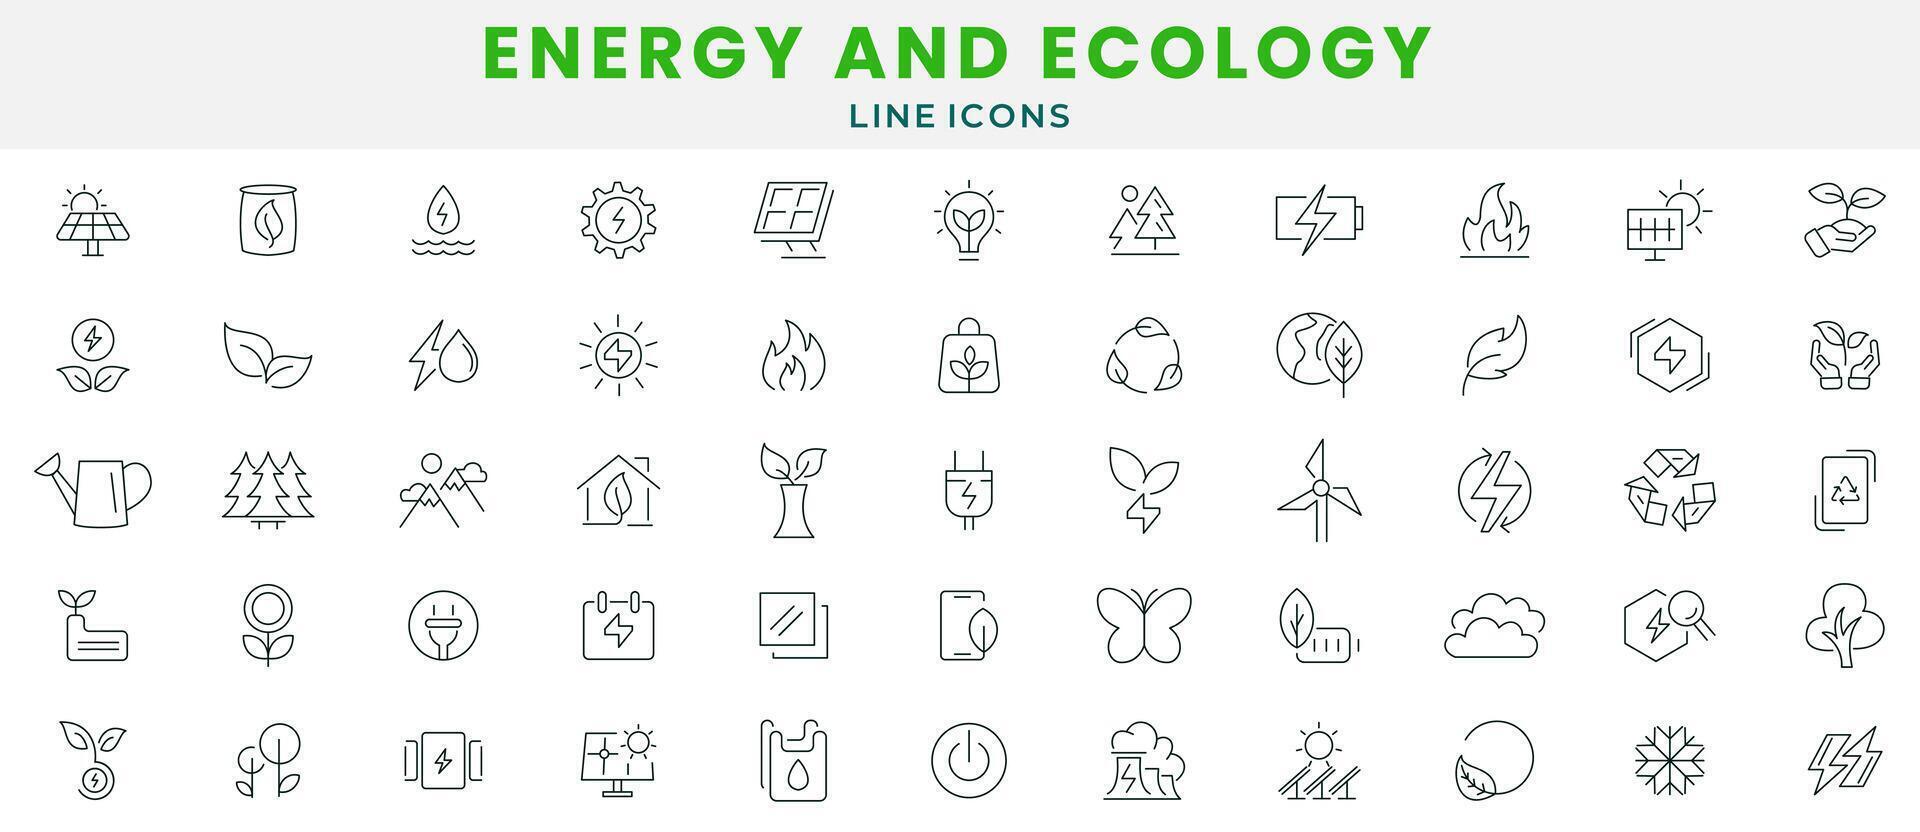 Energy and Ecology icon set. Protection, planet care, natural recycling power, renewable energy, solar cells, environment, Renewable energy, green technology, sustainability, nature, water icon vector